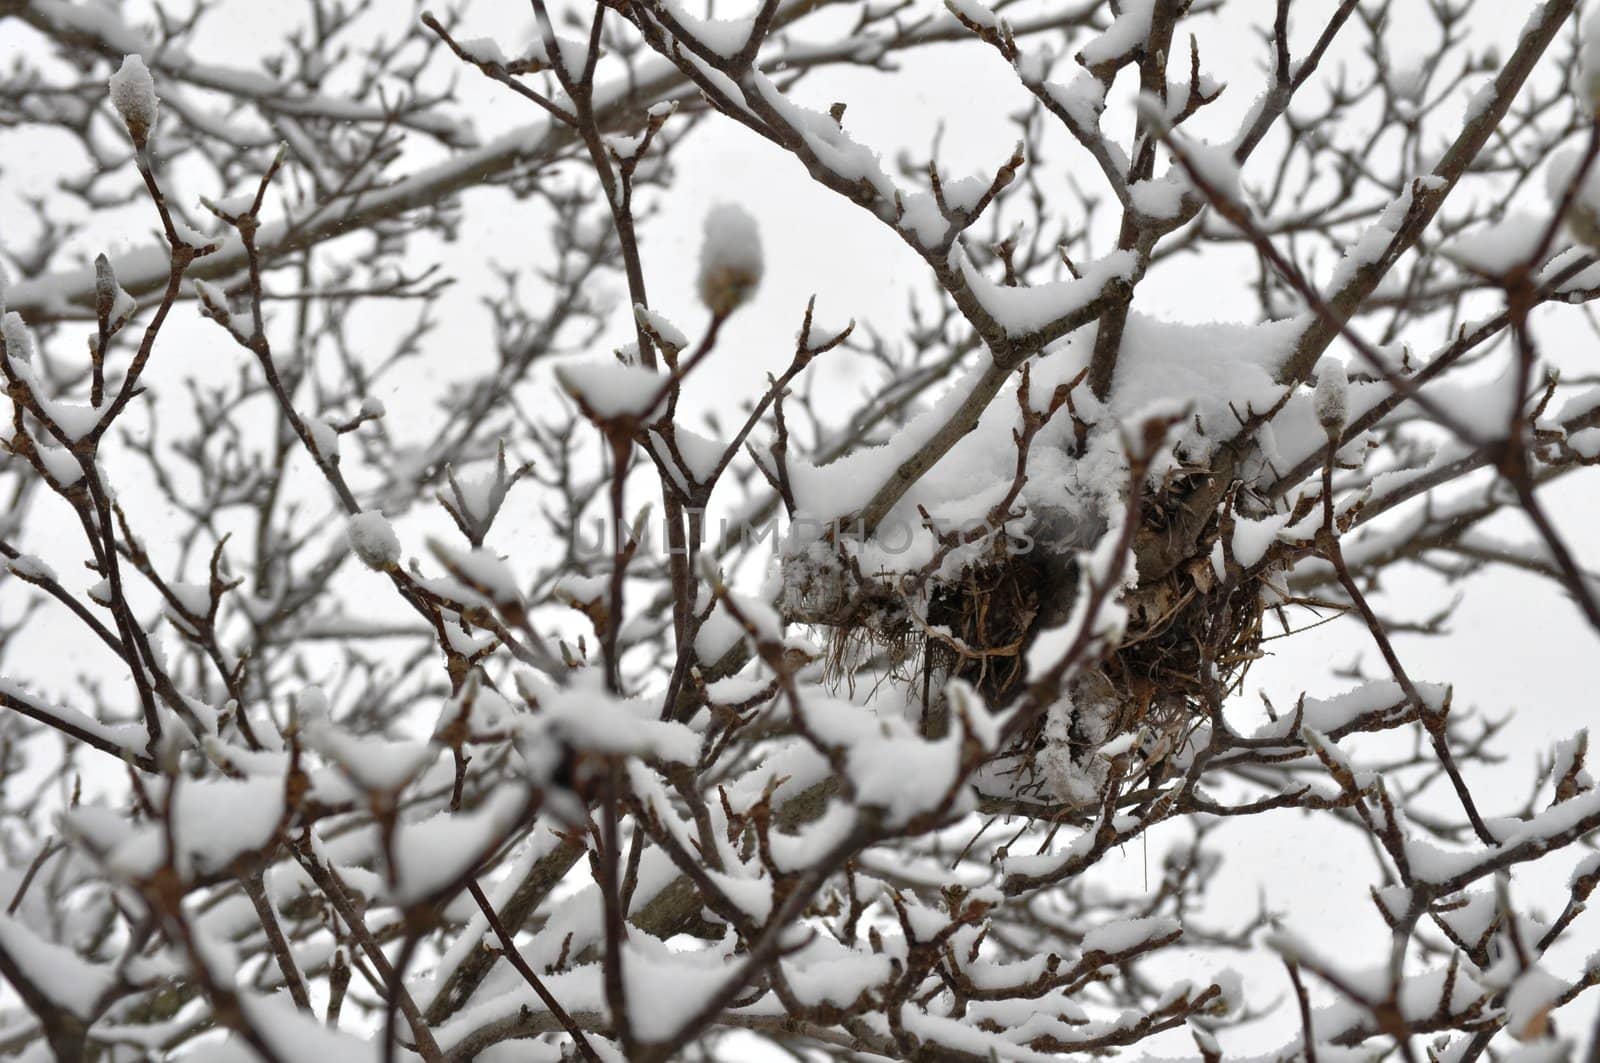 Snowstorm Trees and birds nest by RefocusPhoto